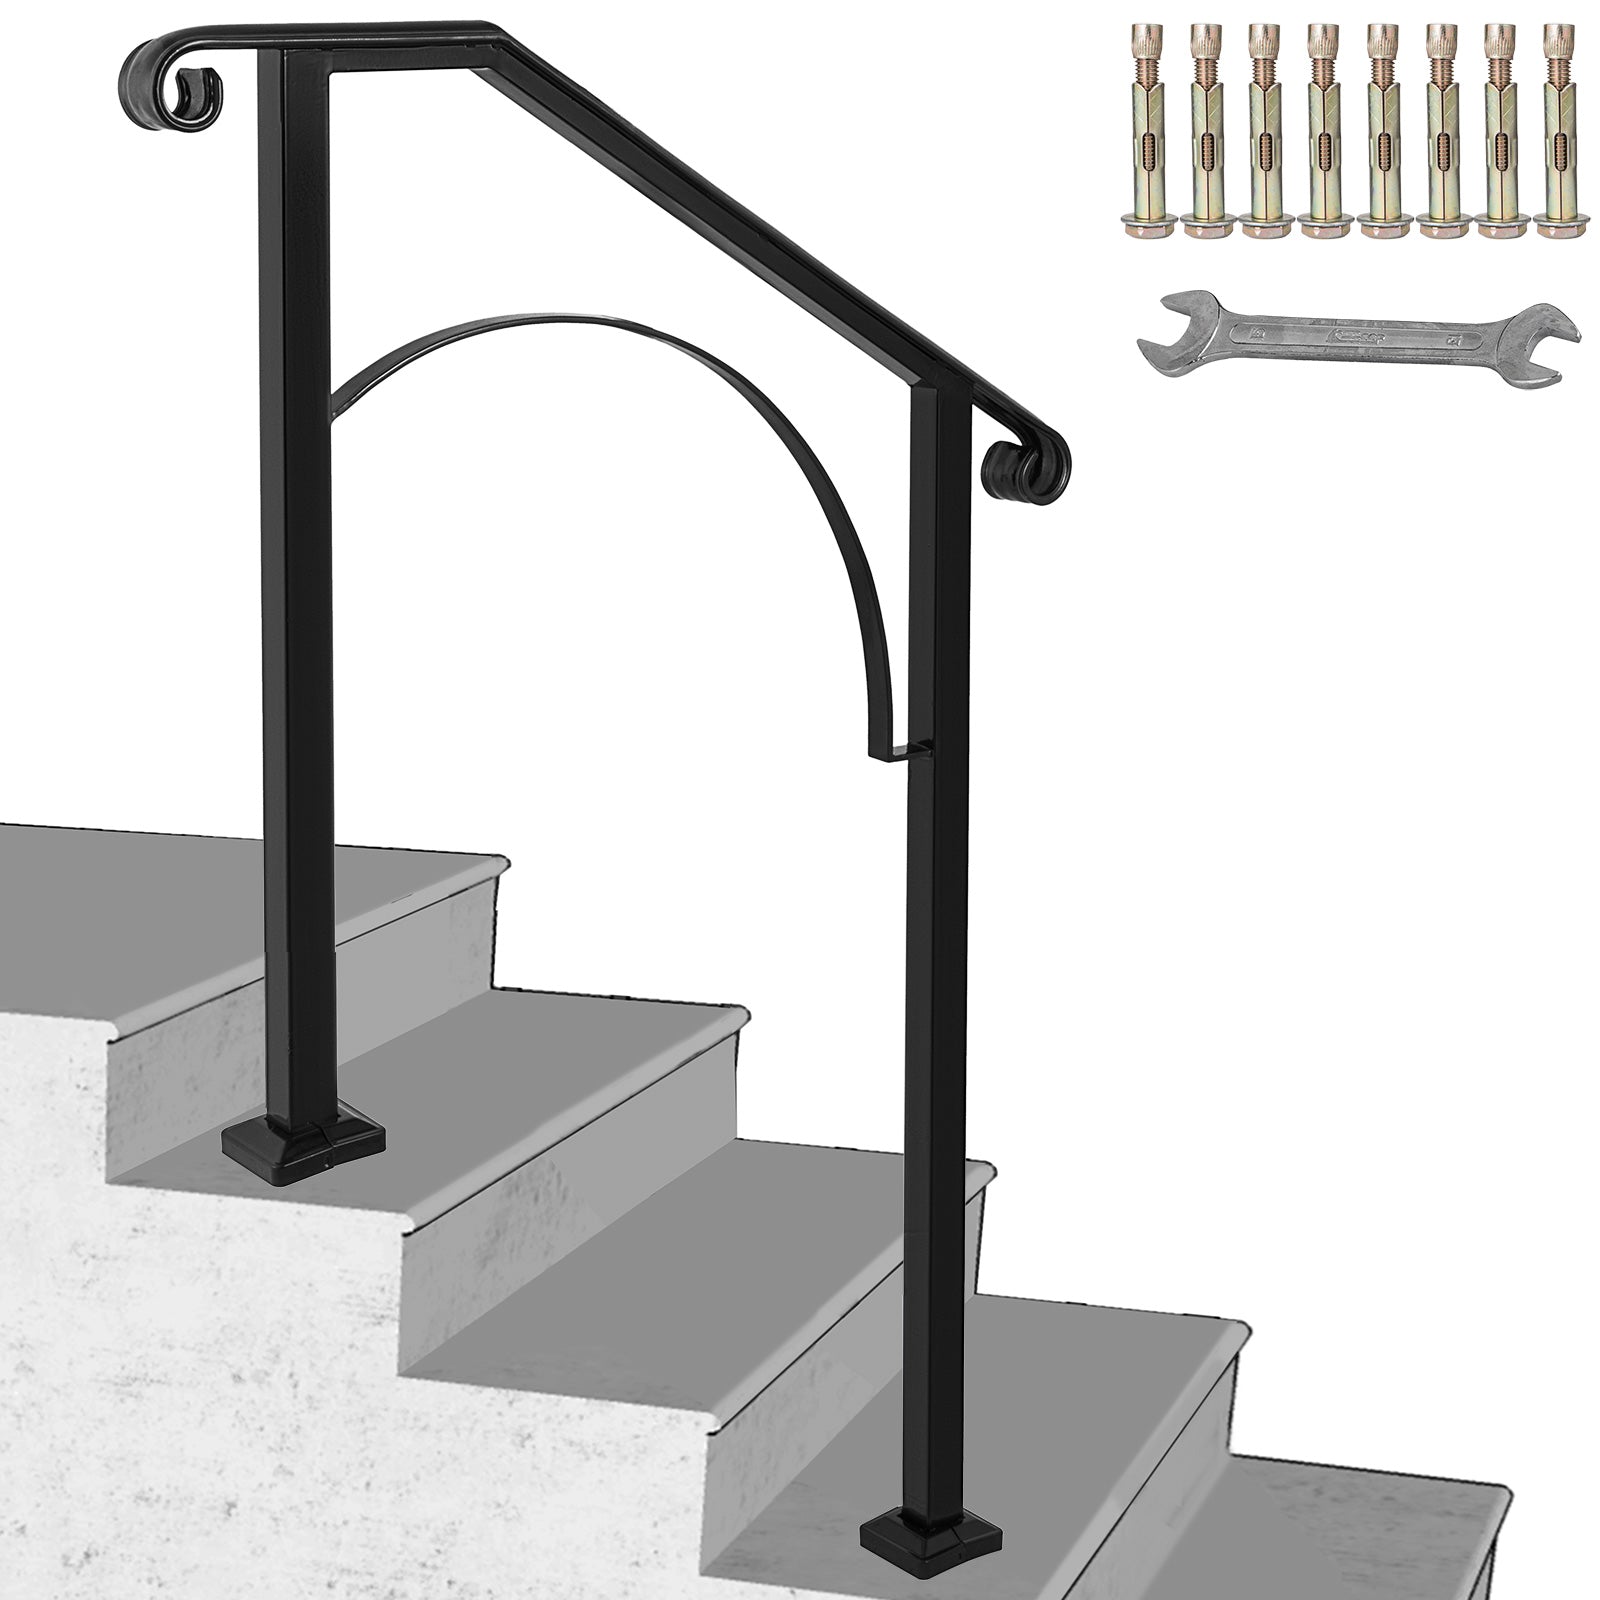 Iron Handrail Arch Step Hand Rail 2 Railing Rail Fits 2 Steps Paver H Vevor Us Was hoping to get opinions and pros and cons of having a hand railing installed at the entry steps of my new ig pool. iron handrail arch step hand rail 2 railing rail fits 2 steps paver h vevor us